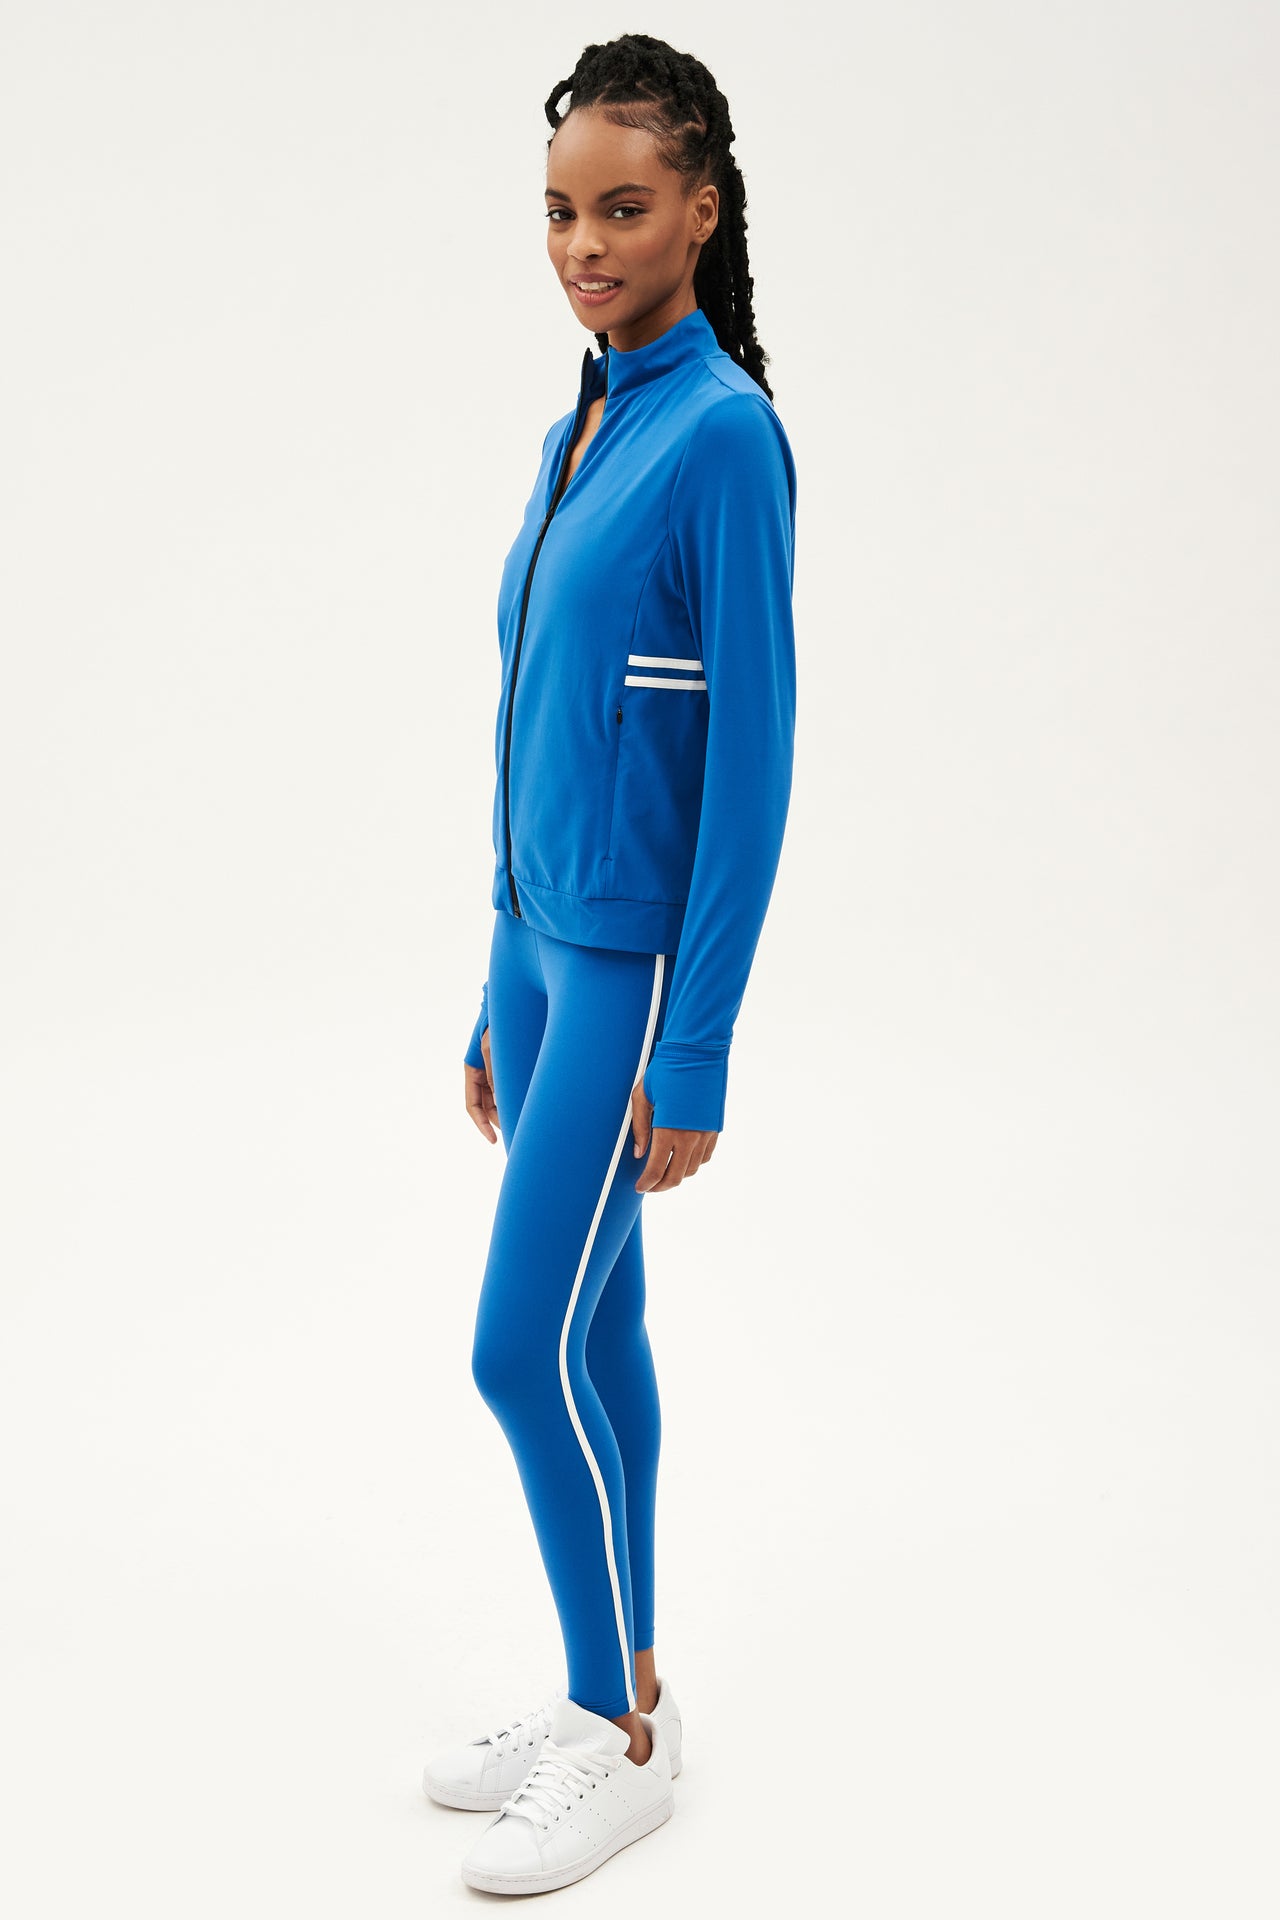 A woman wearing a SPLITS59 Rain Airweight Jacket in Classic Blue and white leggings suitable for barre.